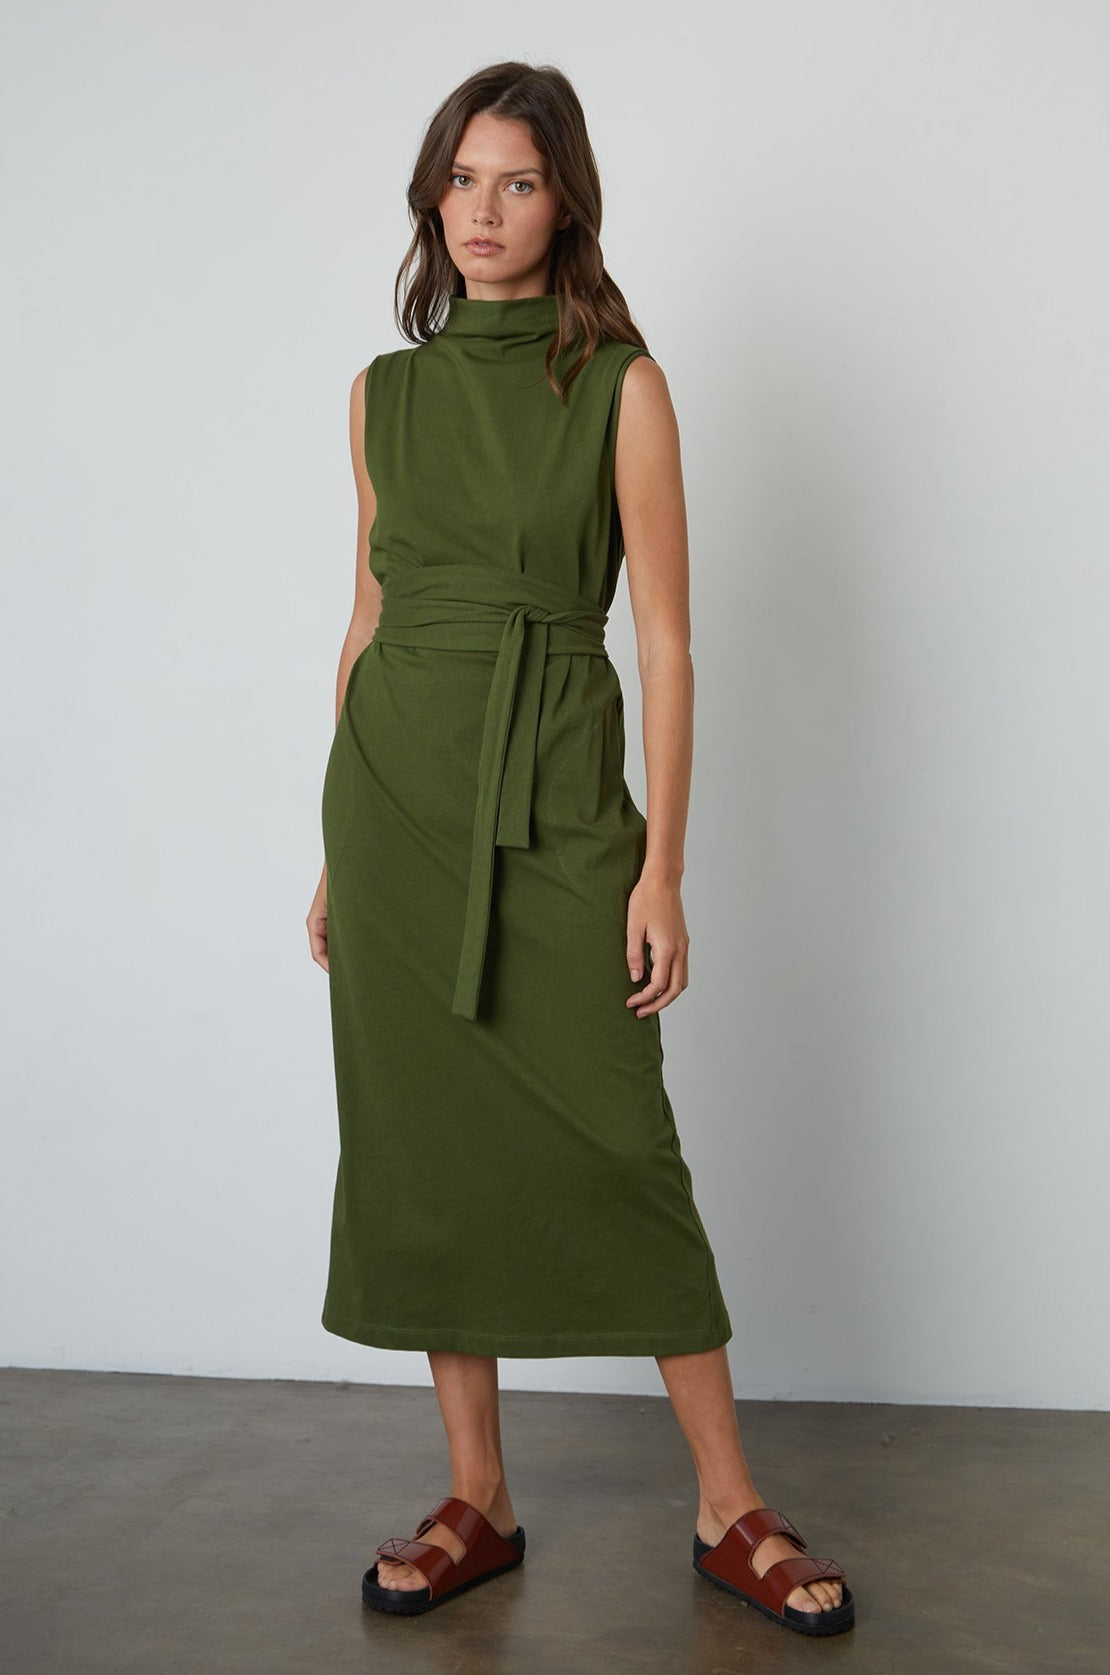   Hydie Mock Neck Dress Structured Cotton in Evergreen with belt front view 3 